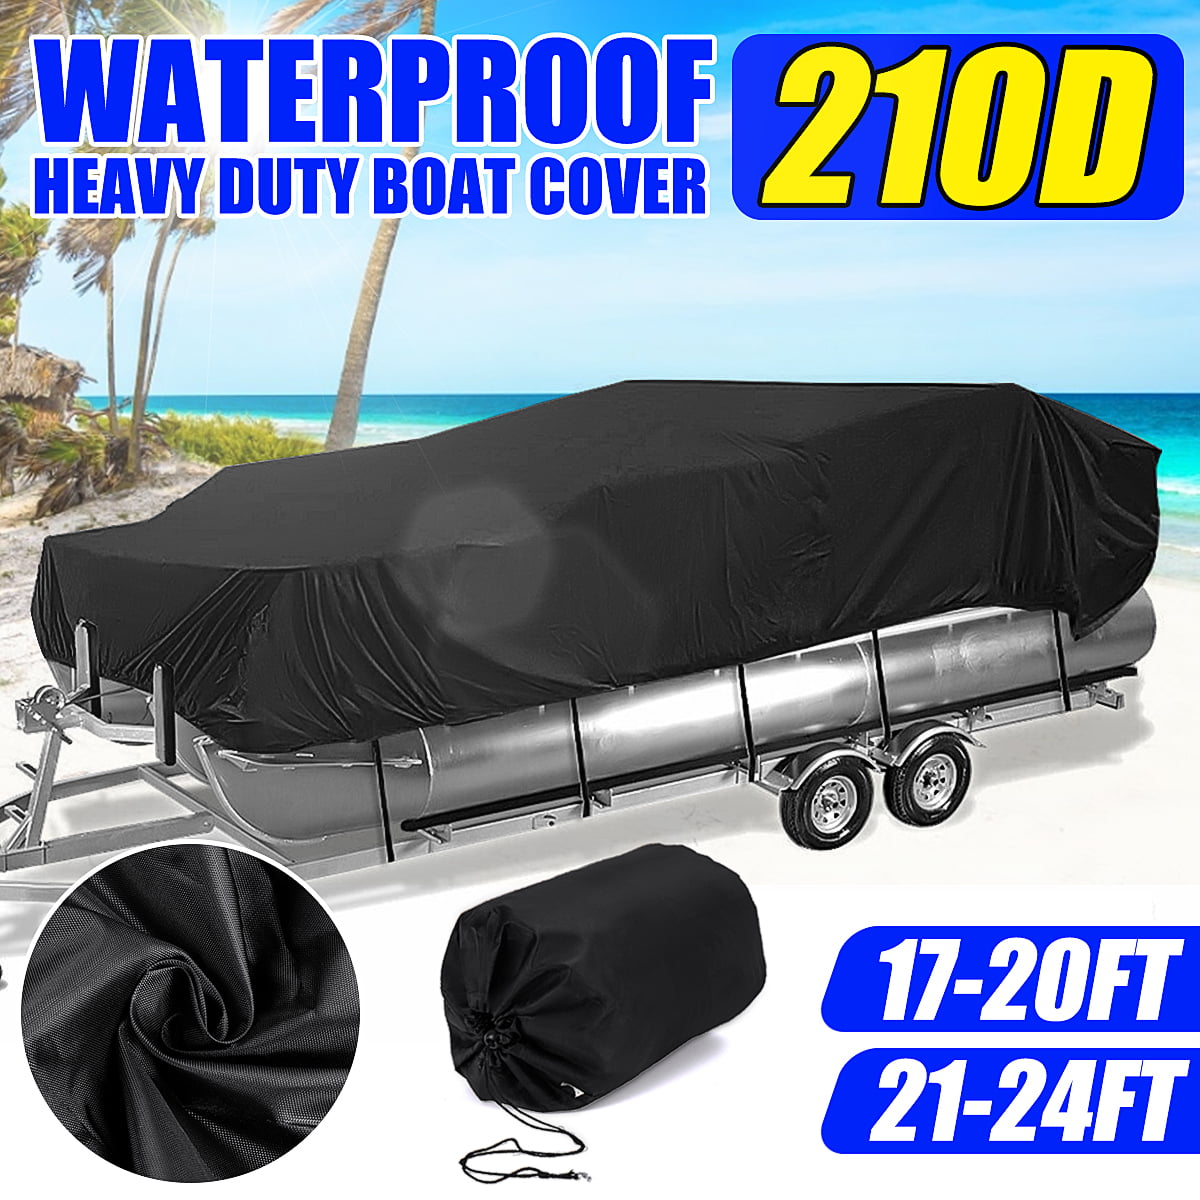 Size : 17-20FT Pontoon Boat Cover,210D Trailerable Heavy Duty Boat Covers,Rain Snow Dust Proof Protection Mooring Cover,Ultimate Durability Waterproof Boat Covers,with Storage Bag 